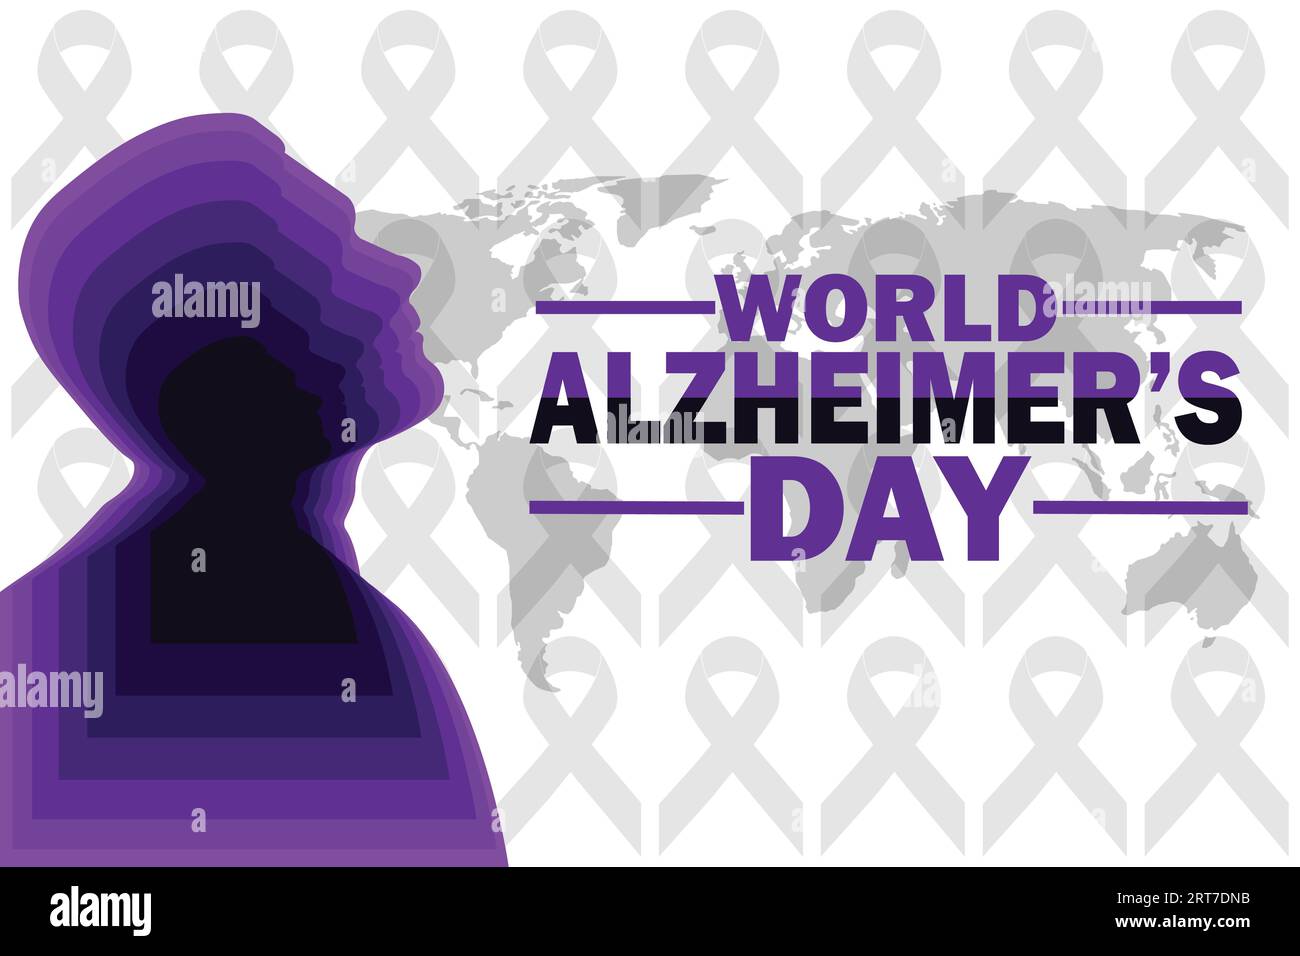 World Alzheimer's Day Vector illustration. Holiday concept. Template for background, banner, card, poster with text inscription. Stock Vector